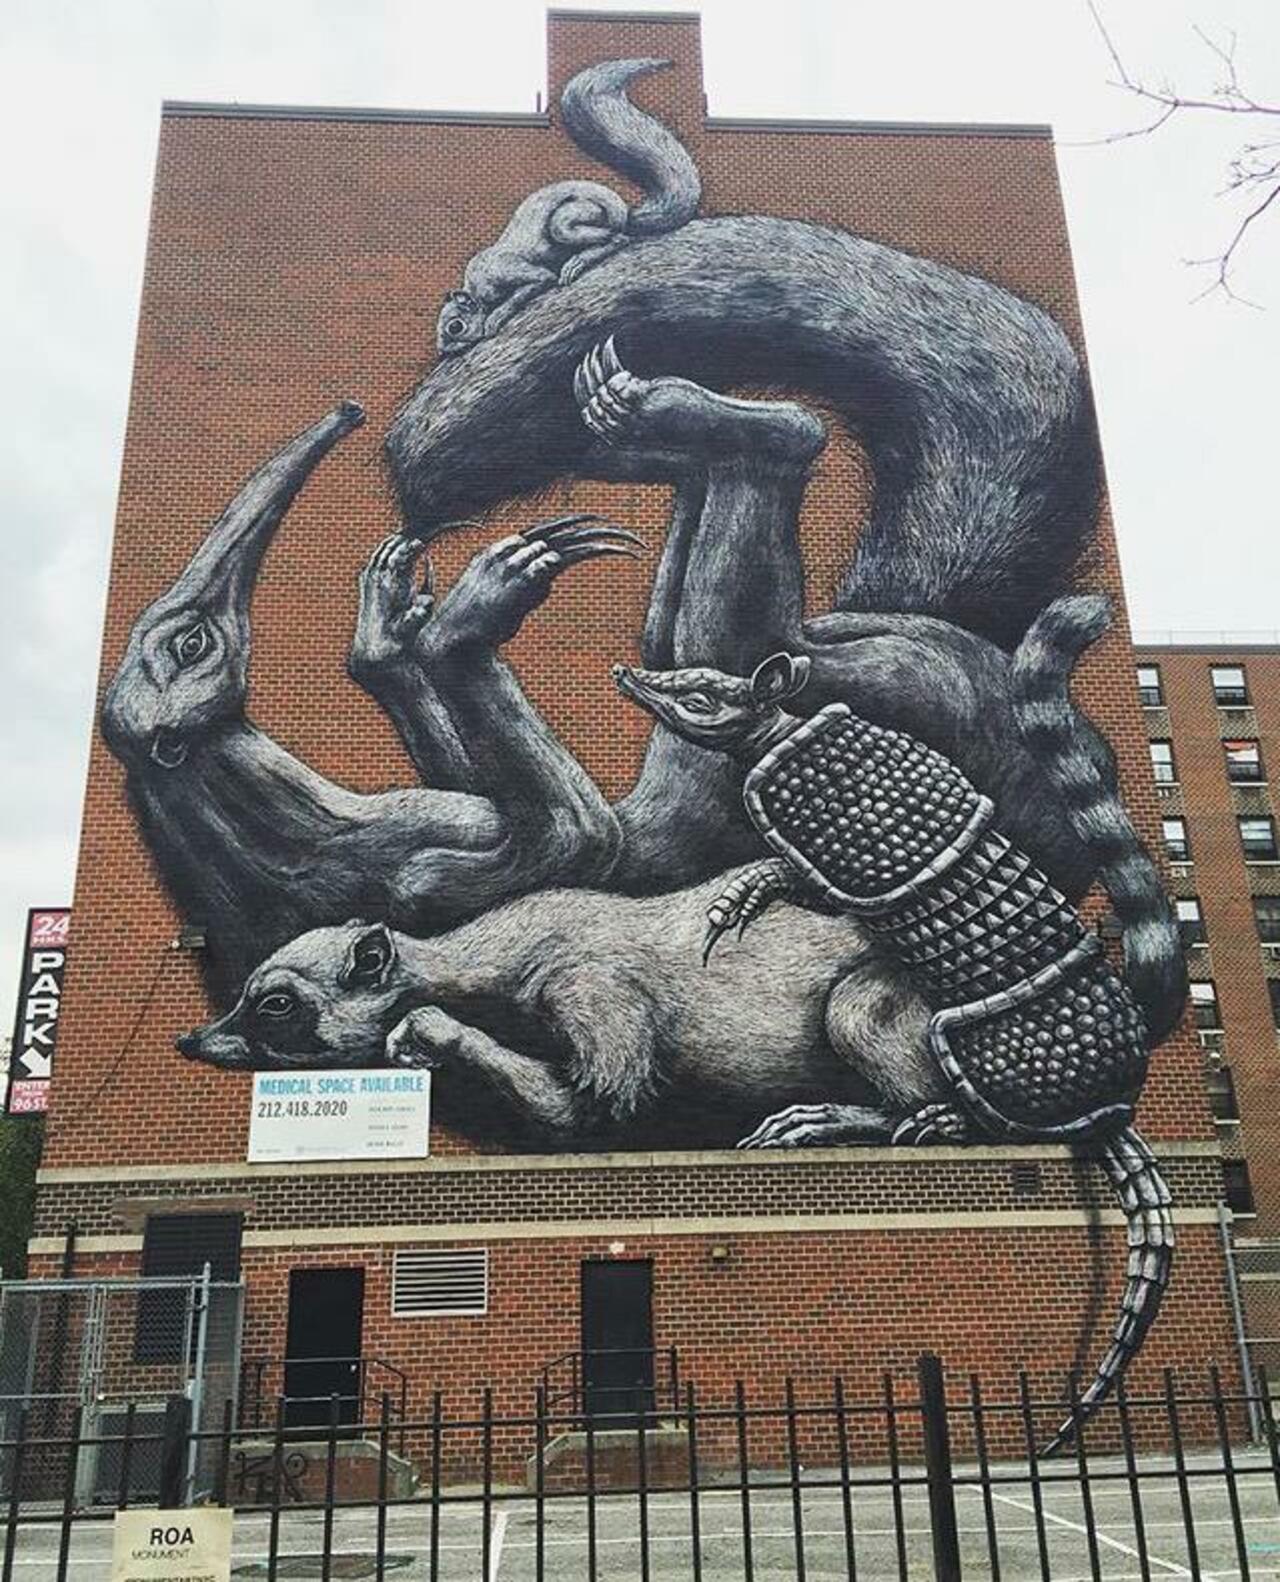 The completed new large scale Street Art wall by ROA in NYC

#art #graffiti #mural #streetart http://t.co/Taod0KnmvX